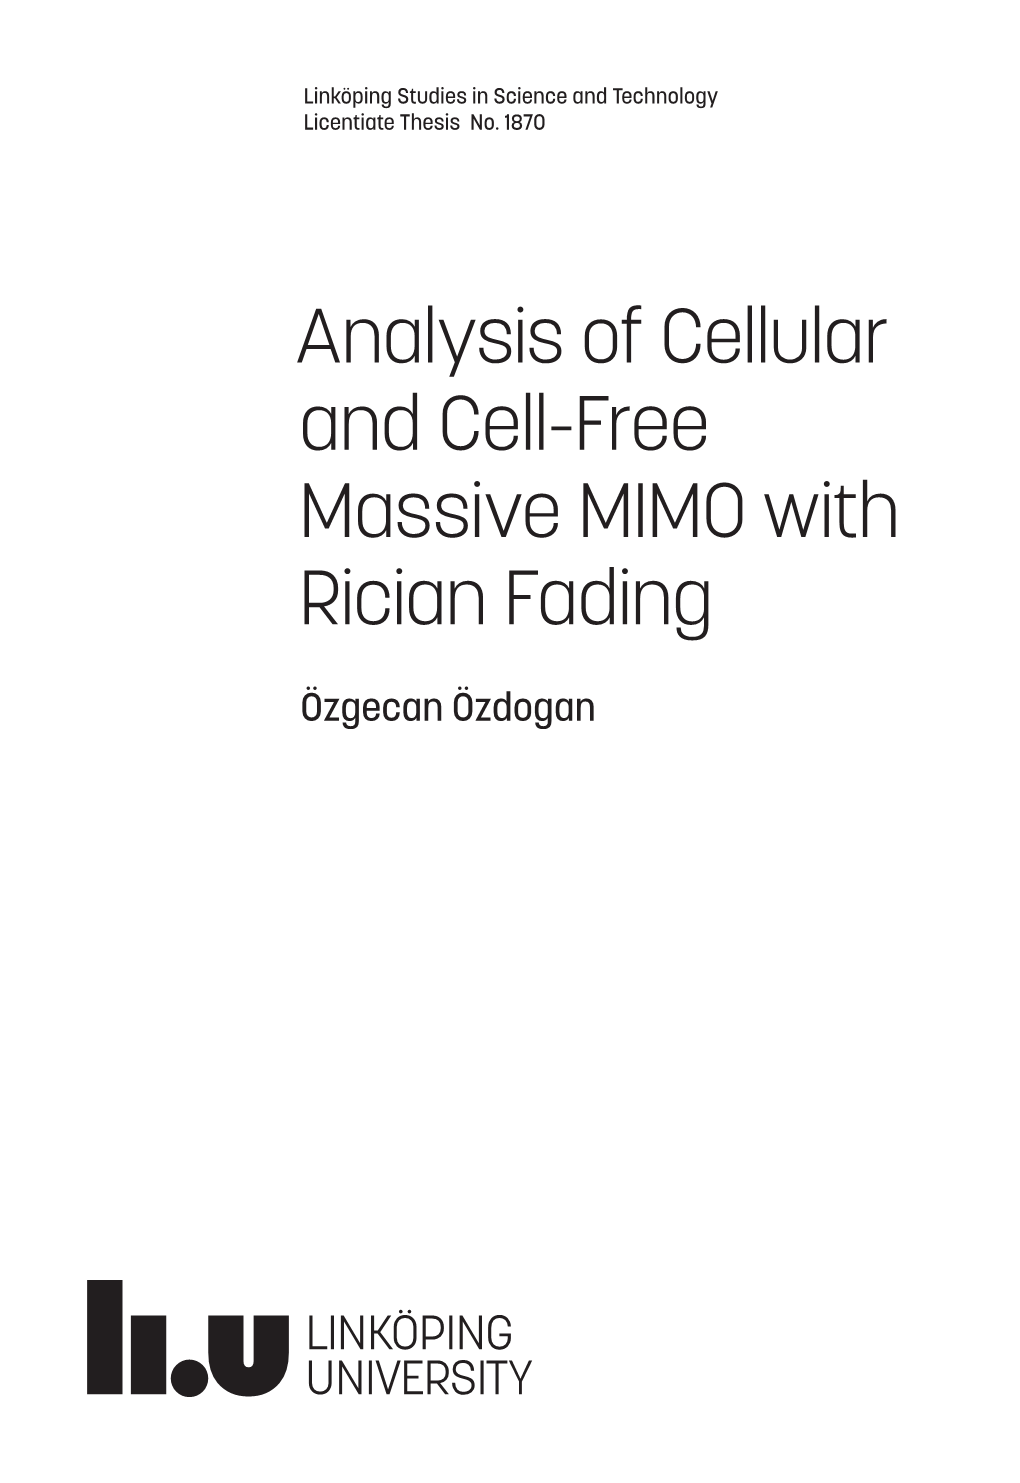 Analysis of Cellular and Cell-Free Massive MIMO with Rician Fading and Cell-Free Massive MIMO with Rician Fading